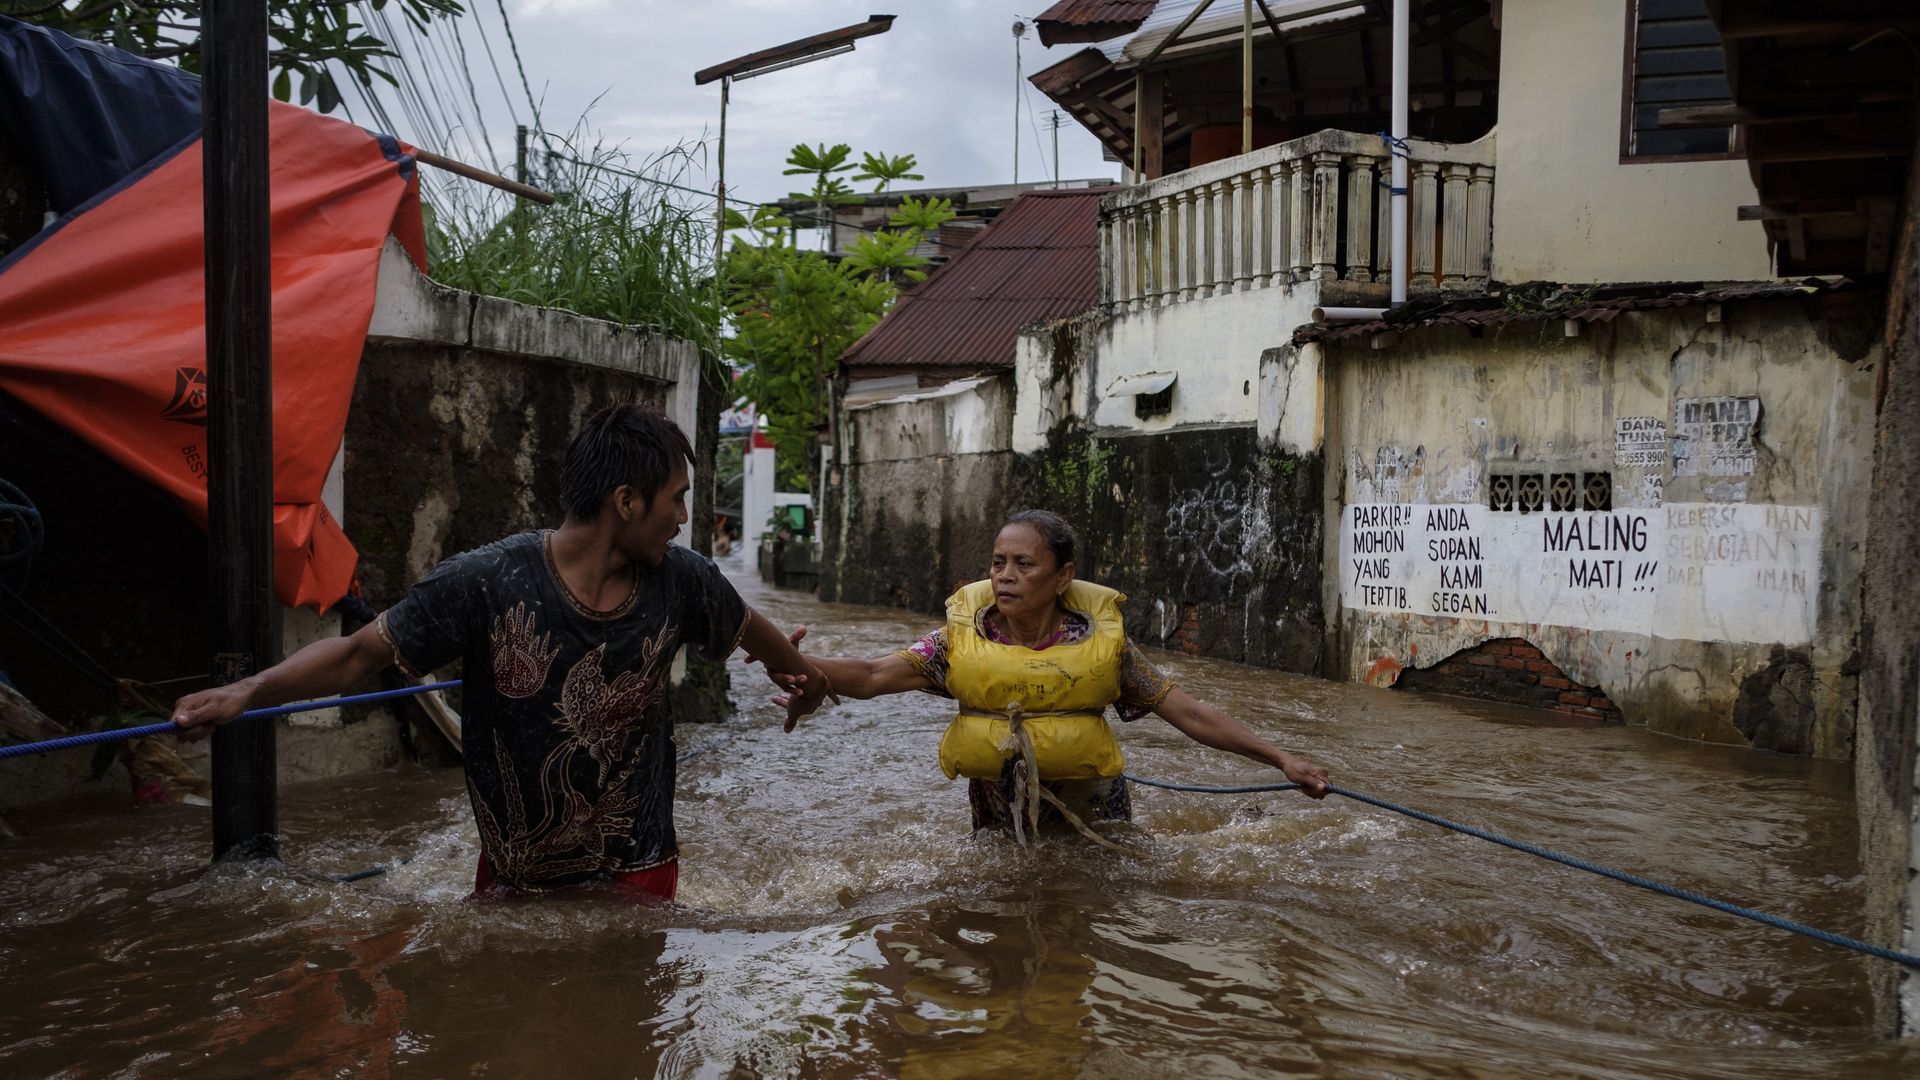 An Indonesian man helps a woman navigate a heavy current in a flooded neighborhood on February 20, 2021 in Jakarta, Indonesia.